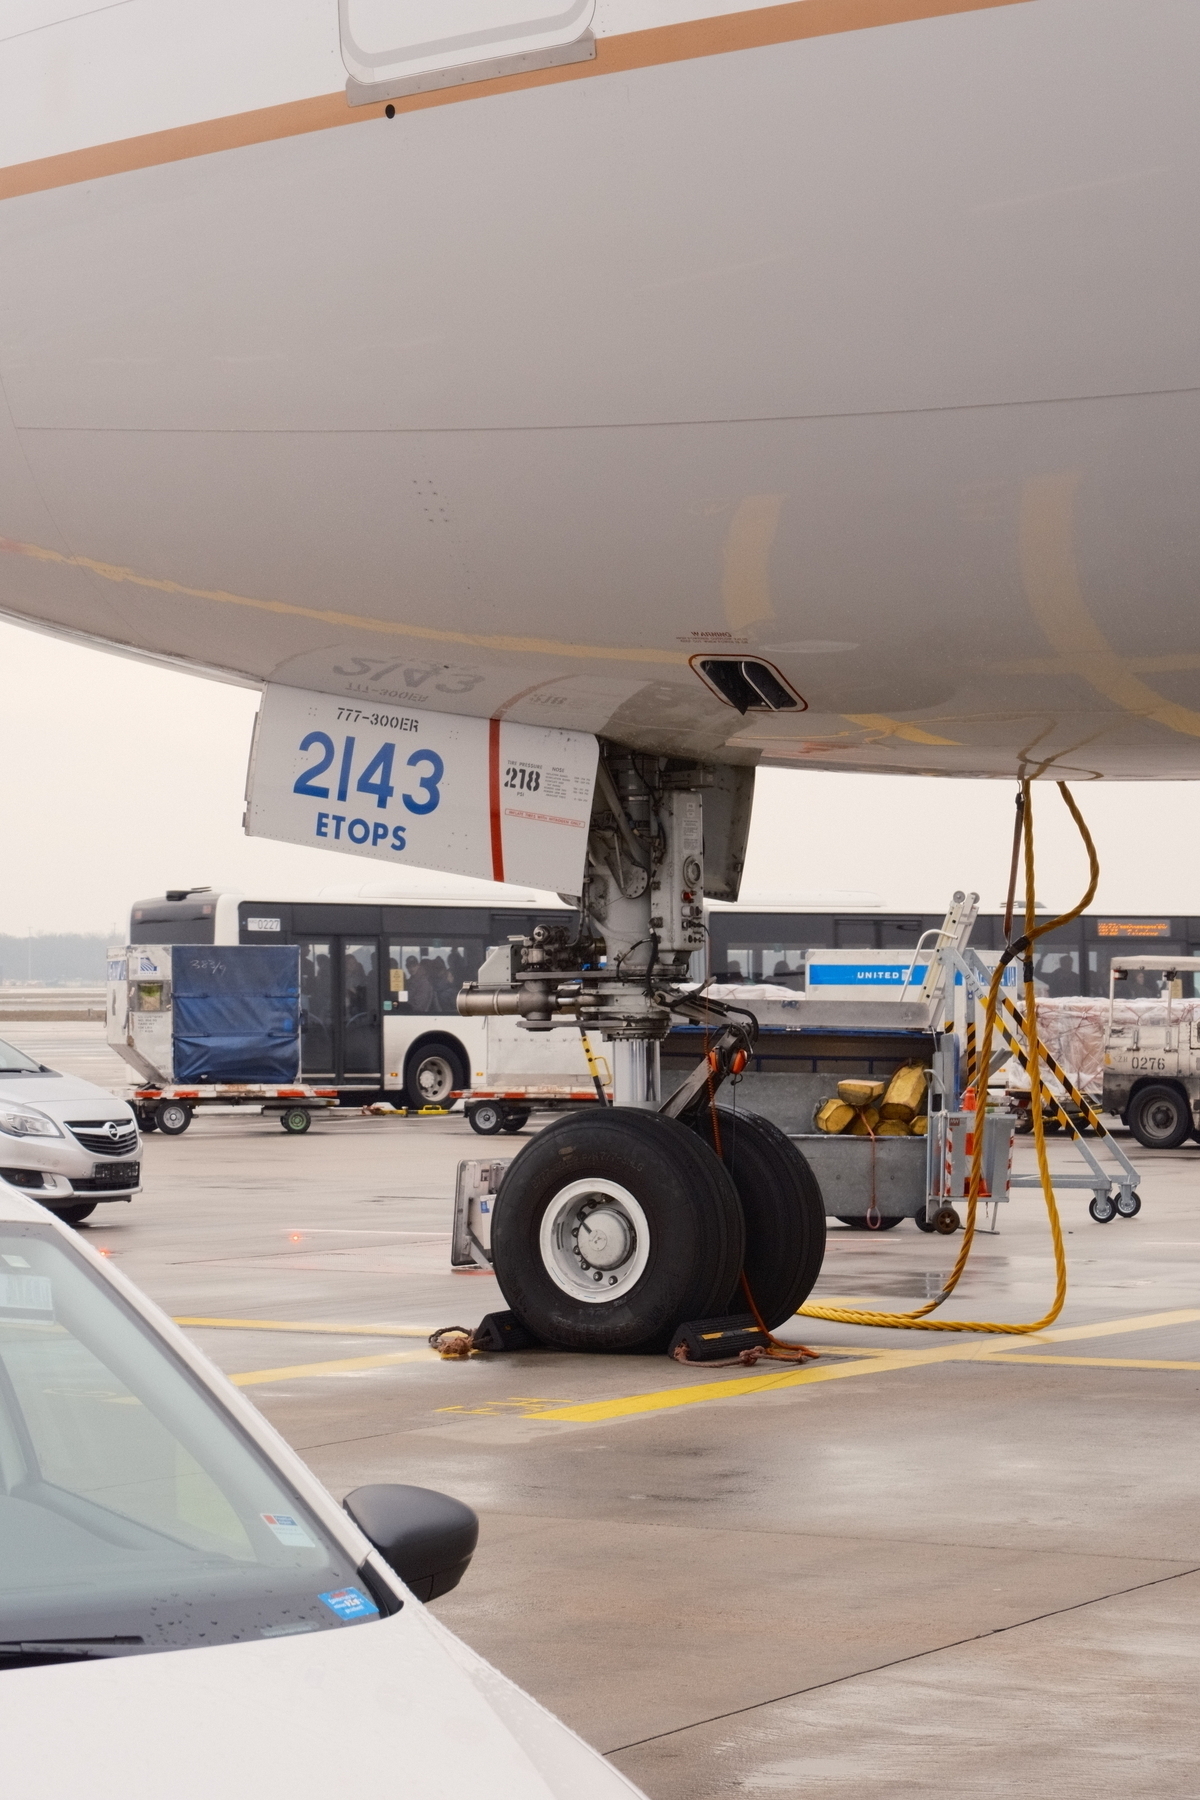 Front nose gear of the 777 with the aircraft ID of 2143. A bus is driving off on the background.